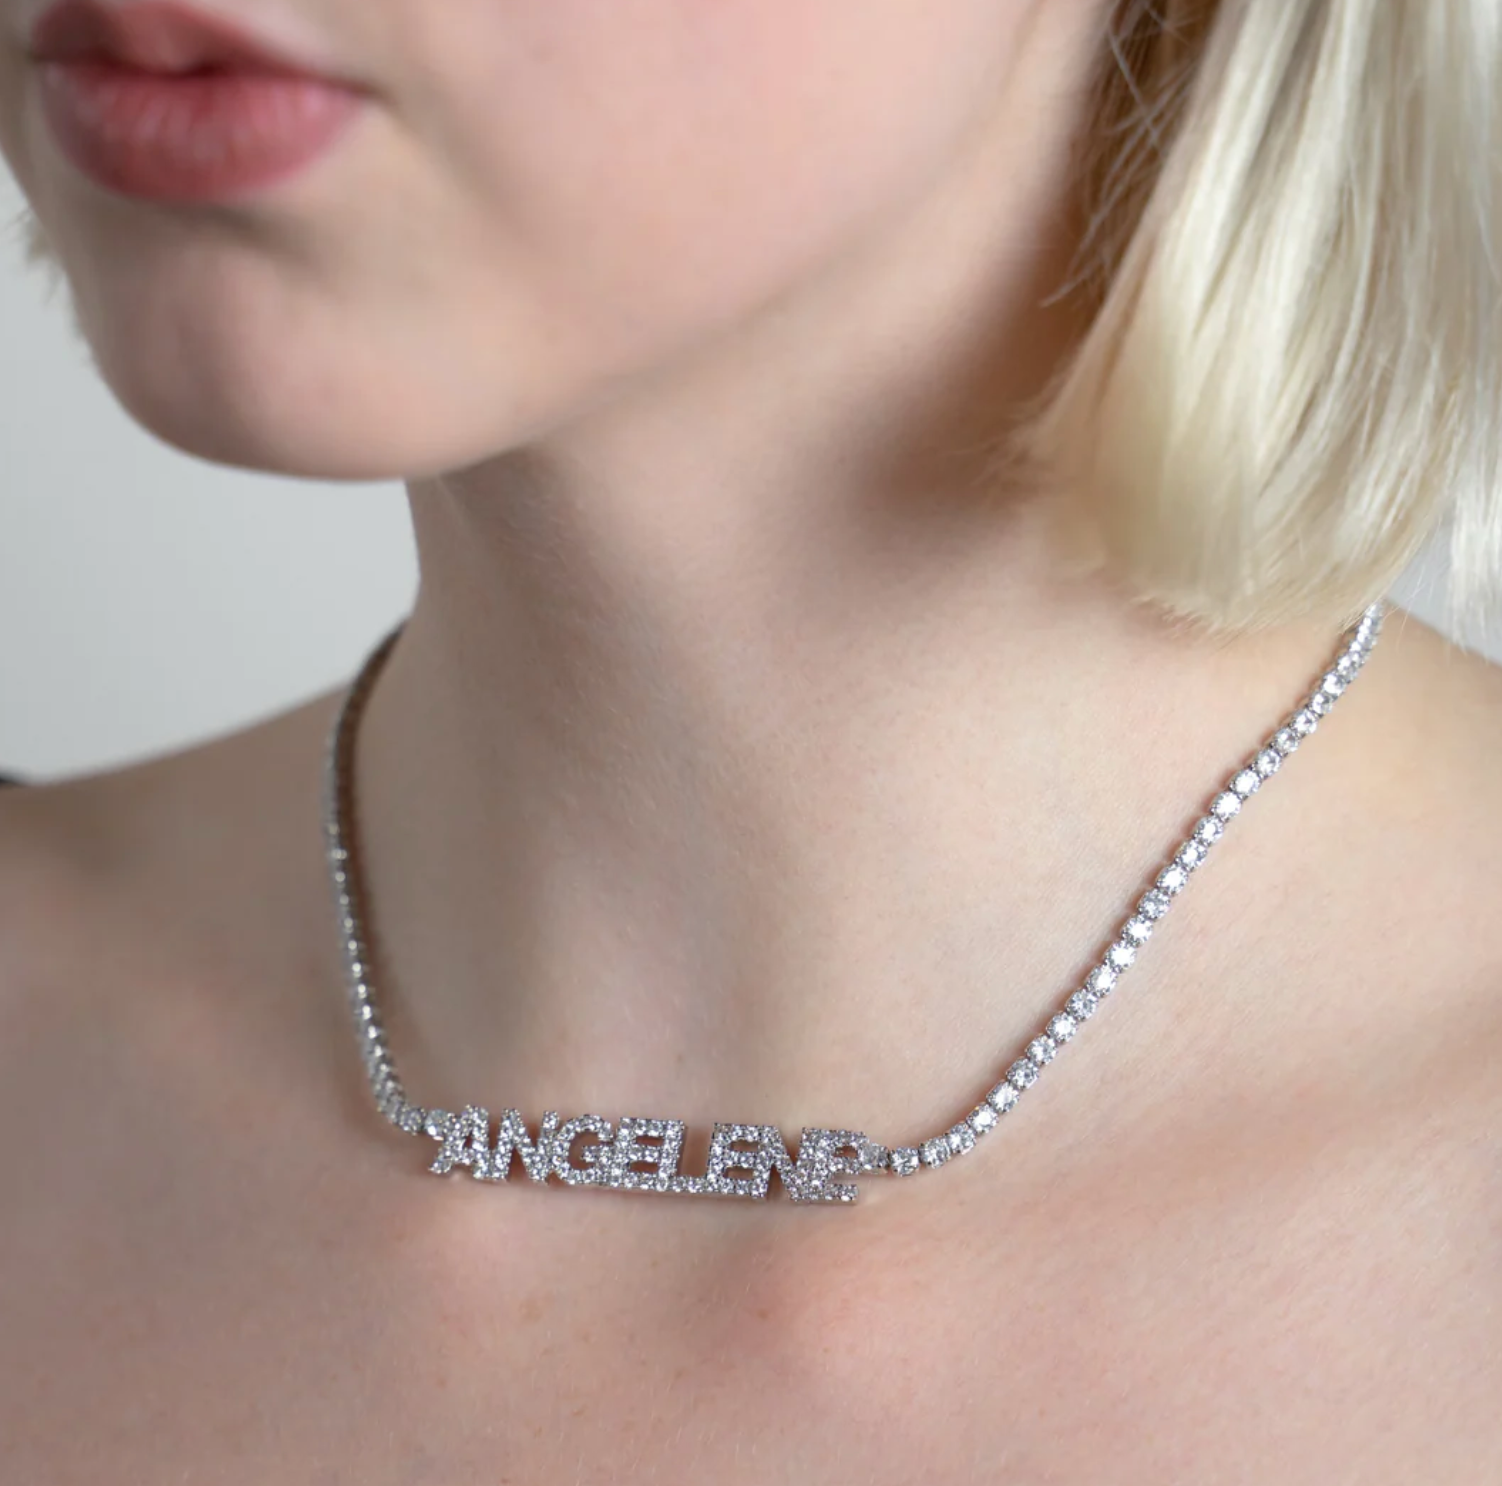 Customized Tennis Chain Nameplate Necklace